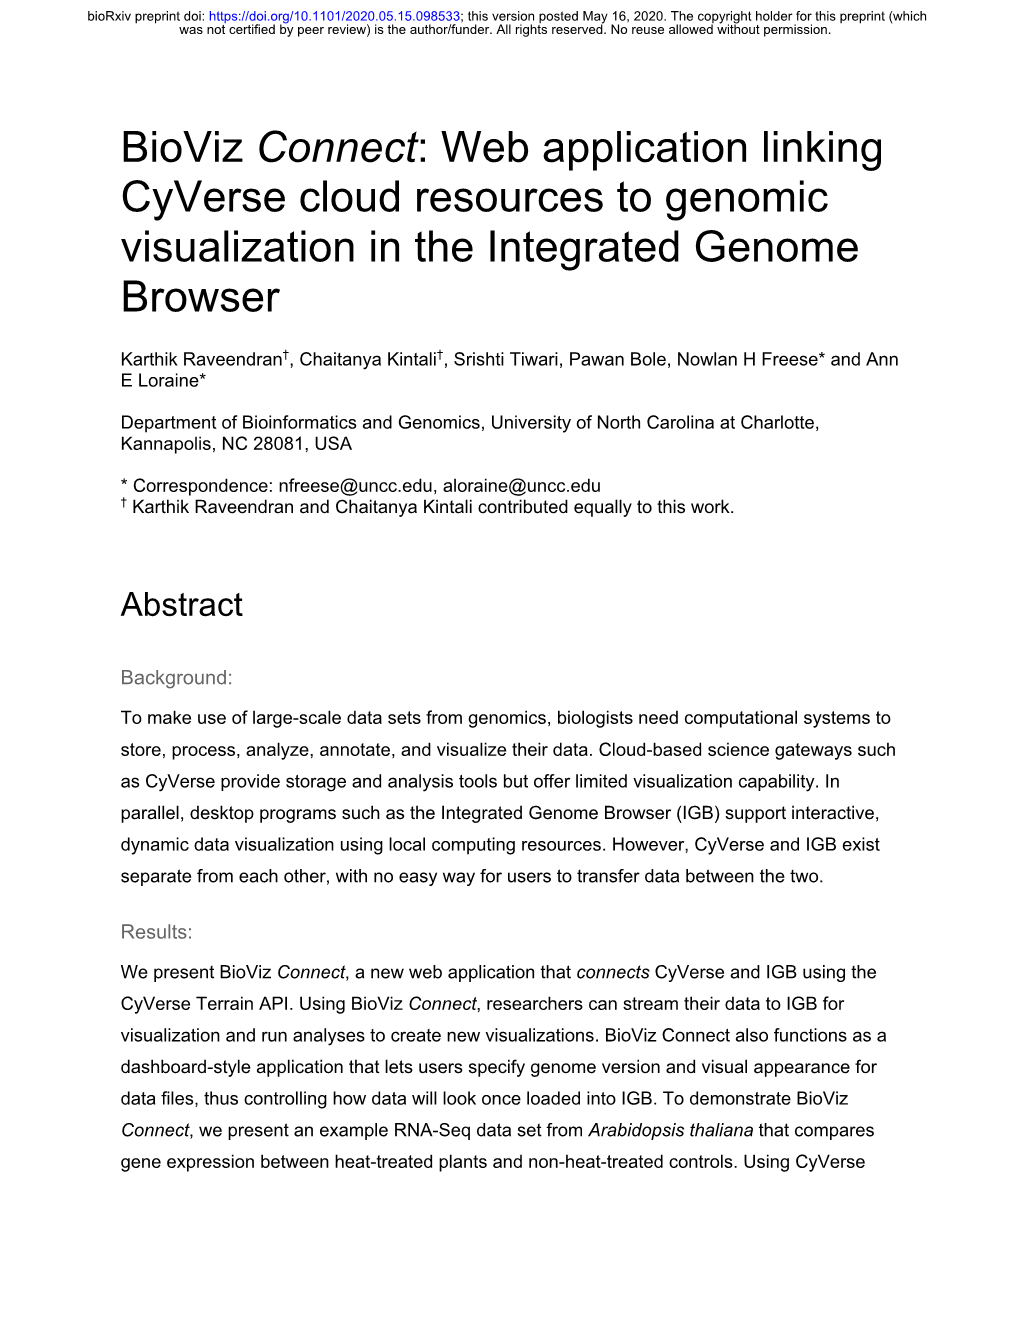 Bioviz Connect: Web Application Linking Cyverse Cloud Resources to Genomic Visualization in the Integrated Genome